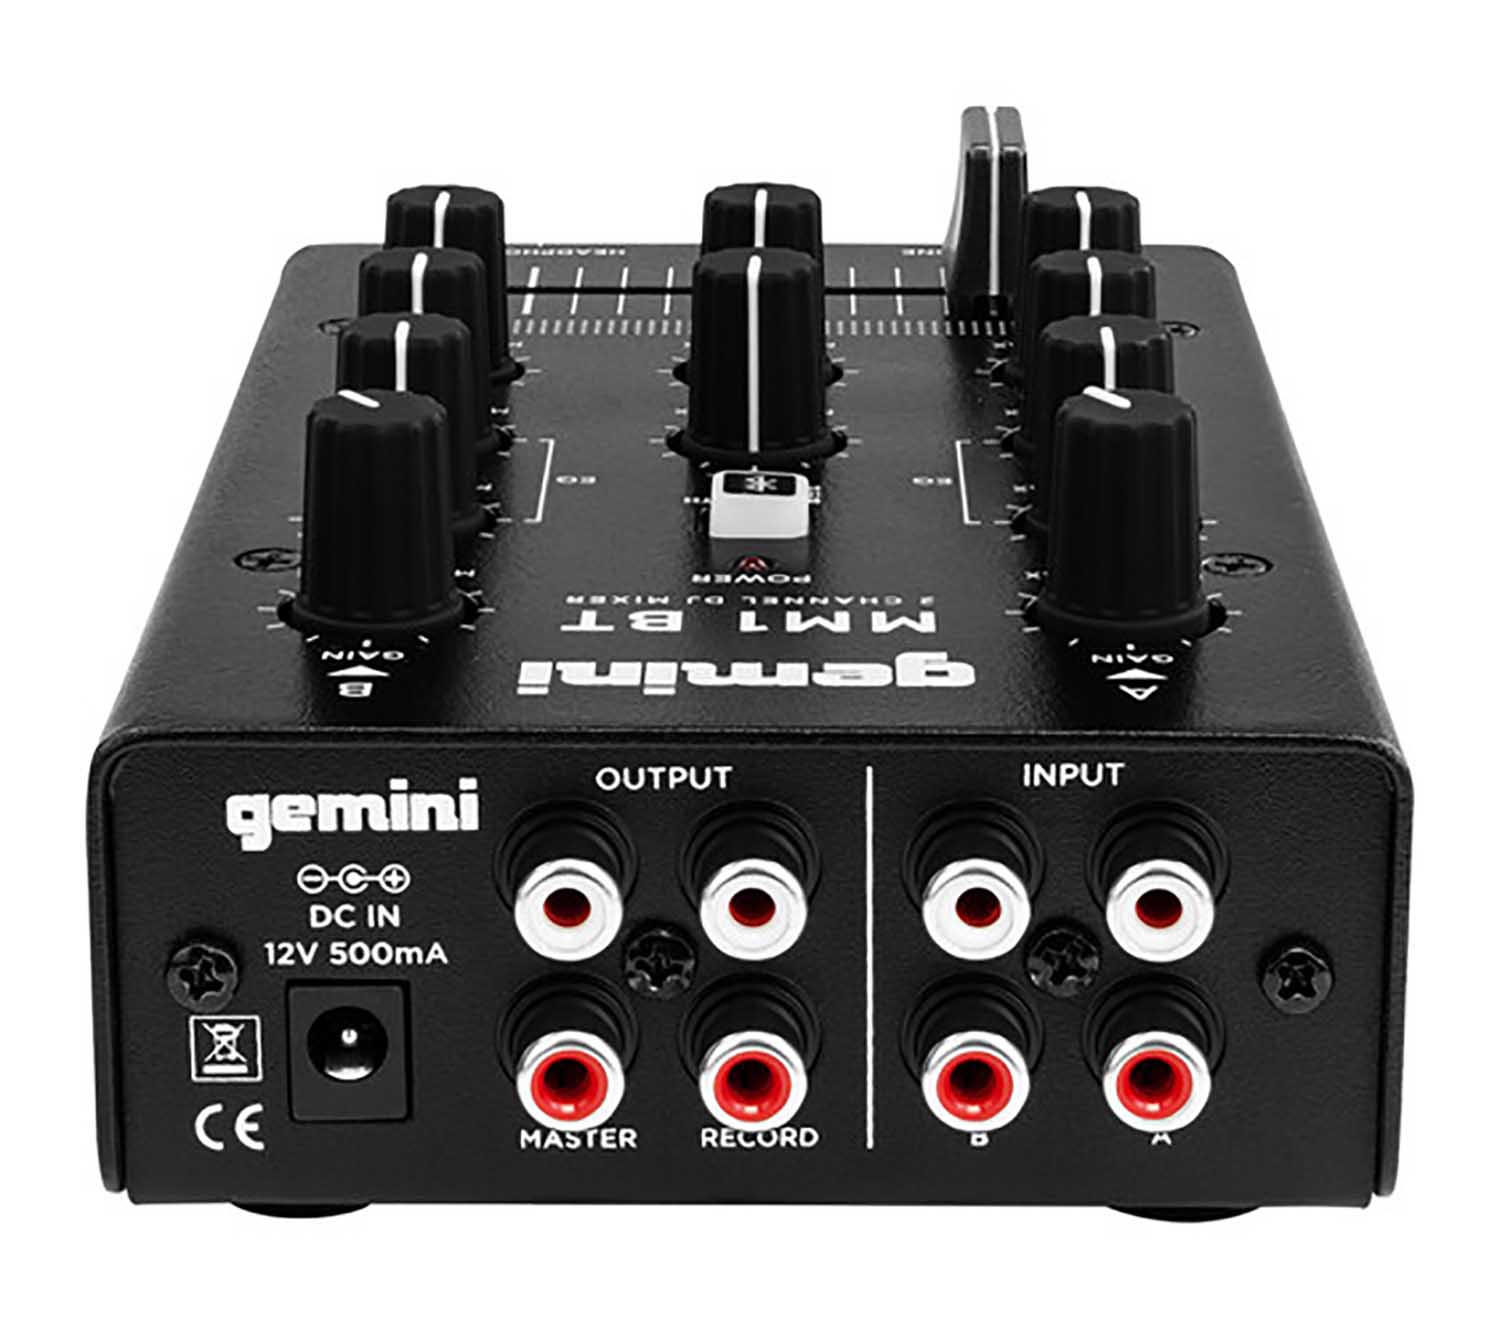 Gemini Sound MM1BT, 2-Channel Compact Mixer with Bluetooth - Hollywood DJ